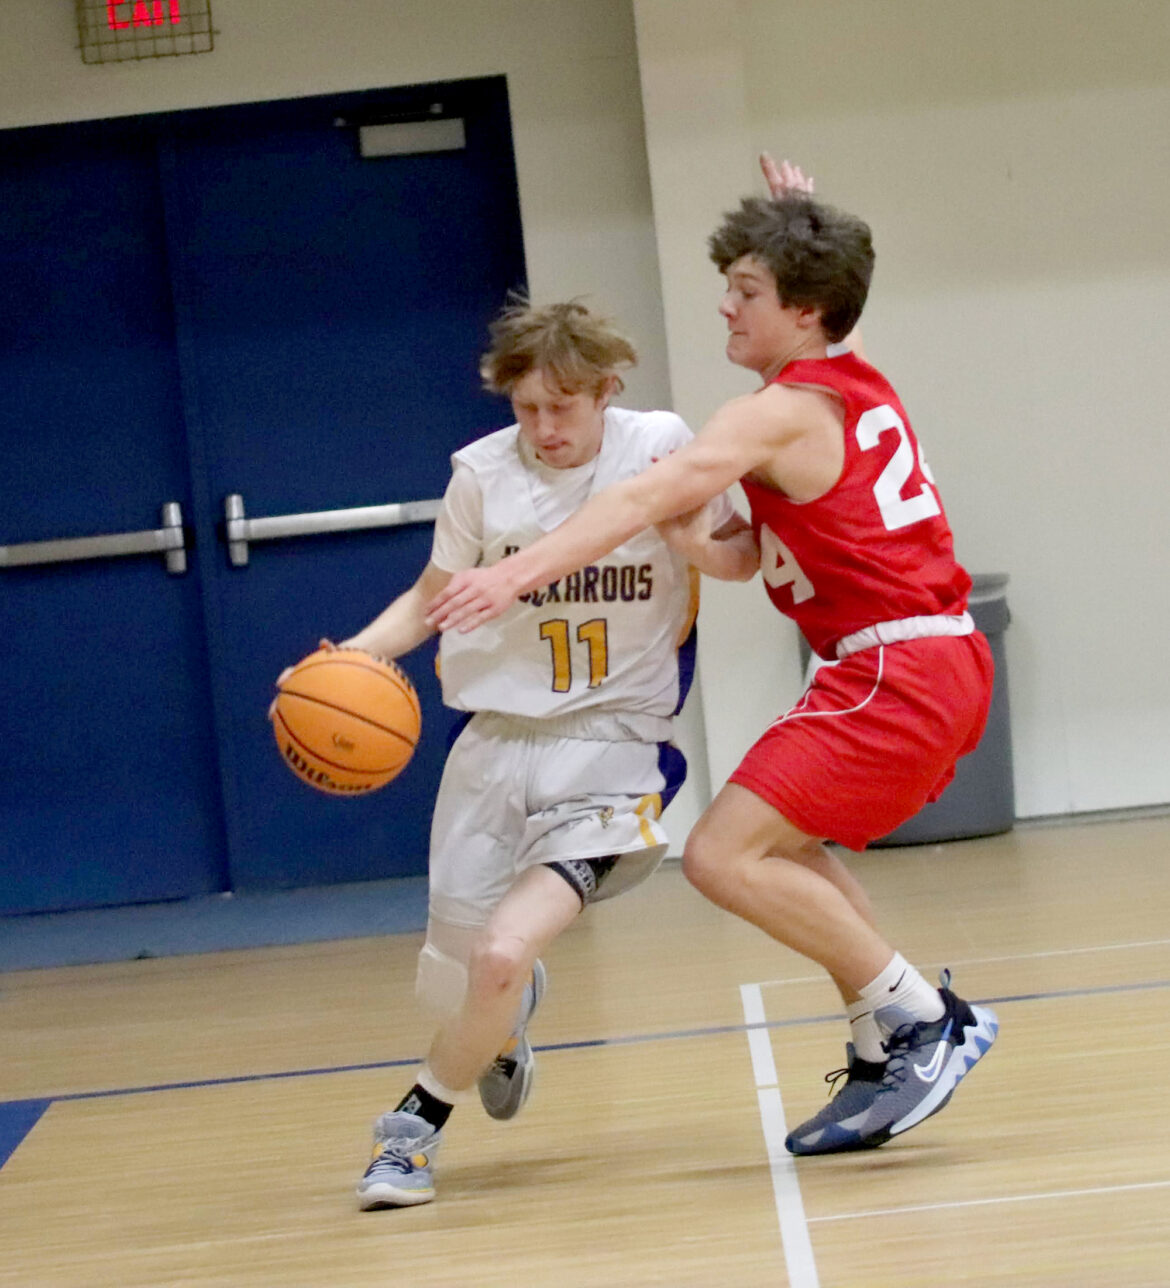 Freshman boys are on the court and thrilled to start first high school basketball season